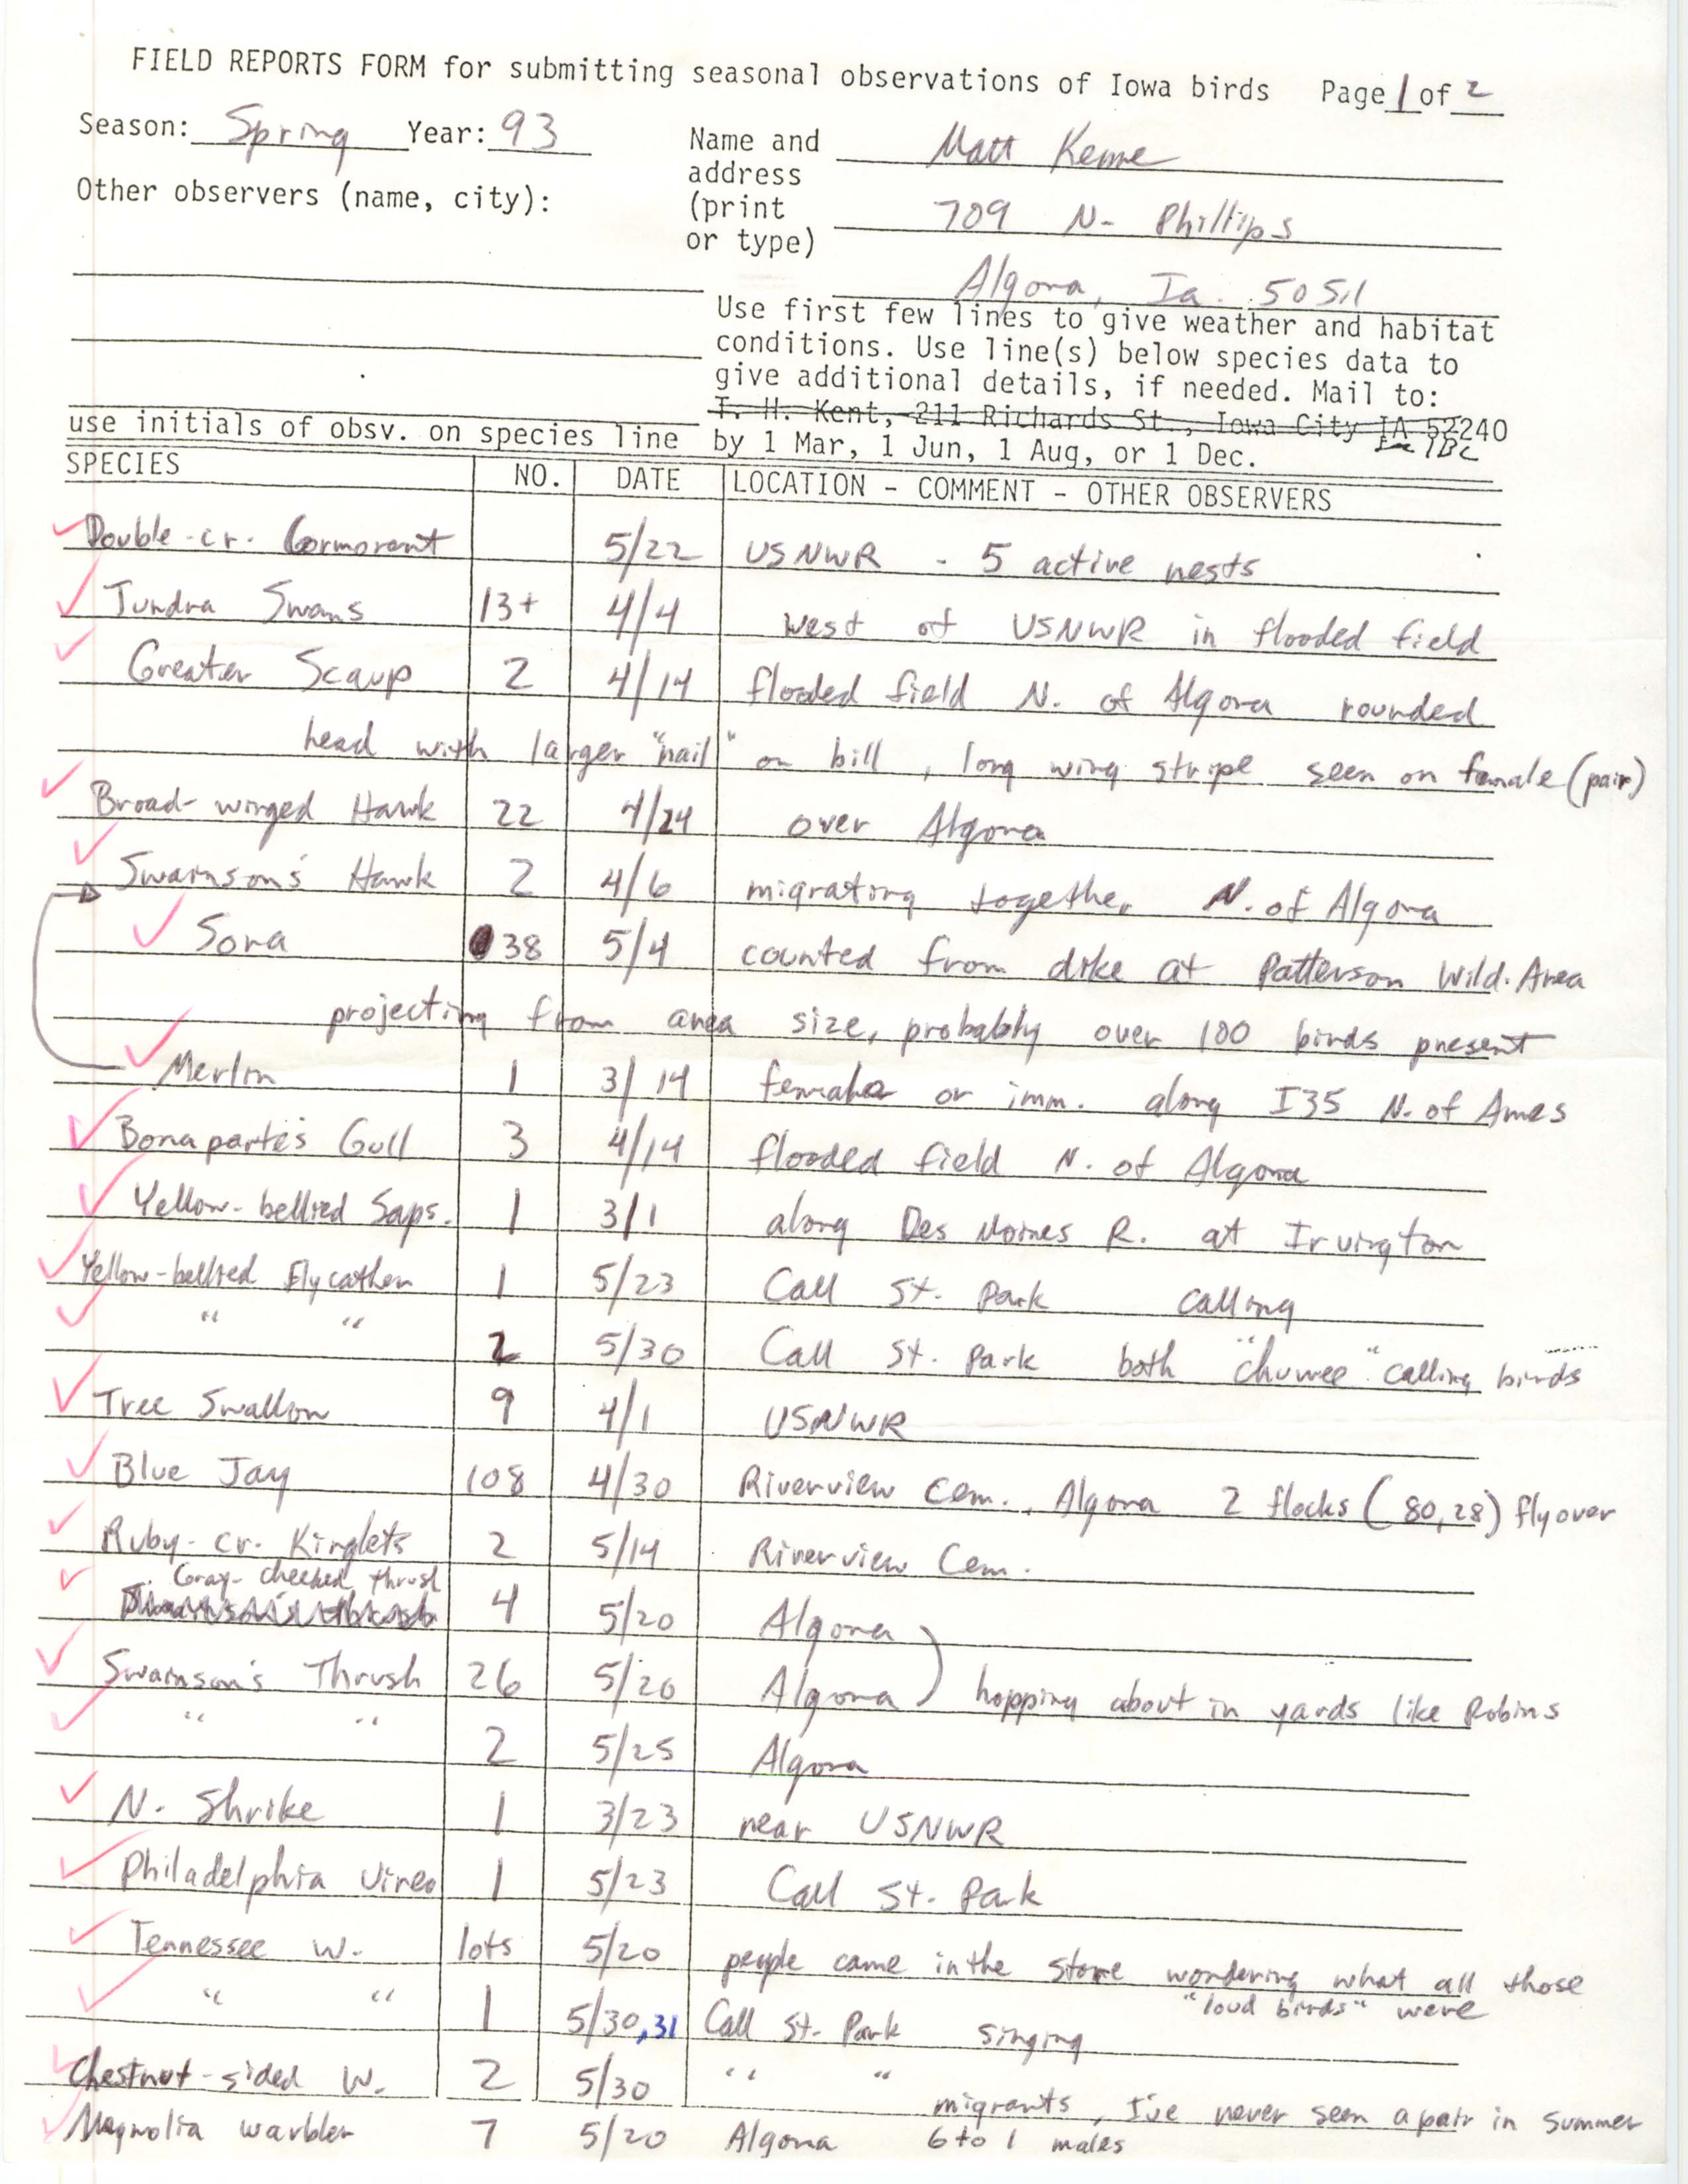 Field reports form for submitting seasonal observations of Iowa birds, Matt Kenne, Spring 1993